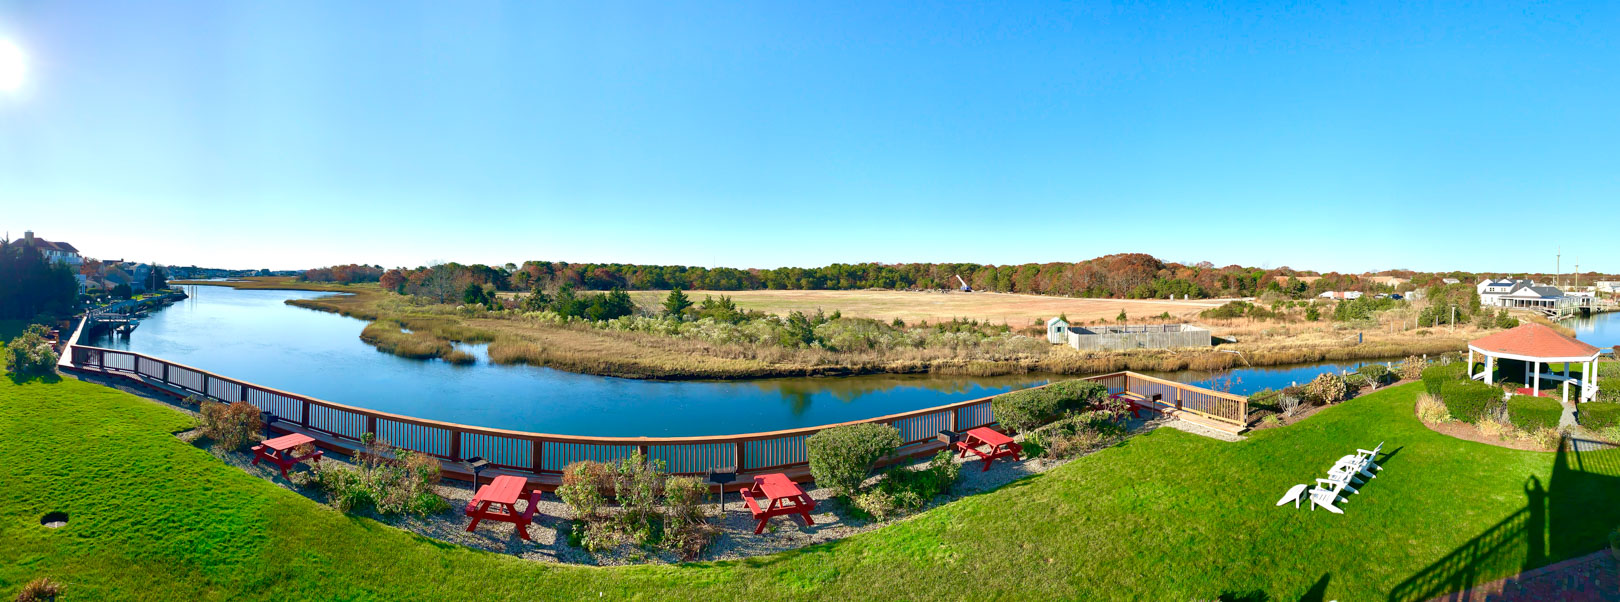 An expansive view of VRI's Riverview Resort in South Yarmouth, Massachusetts.